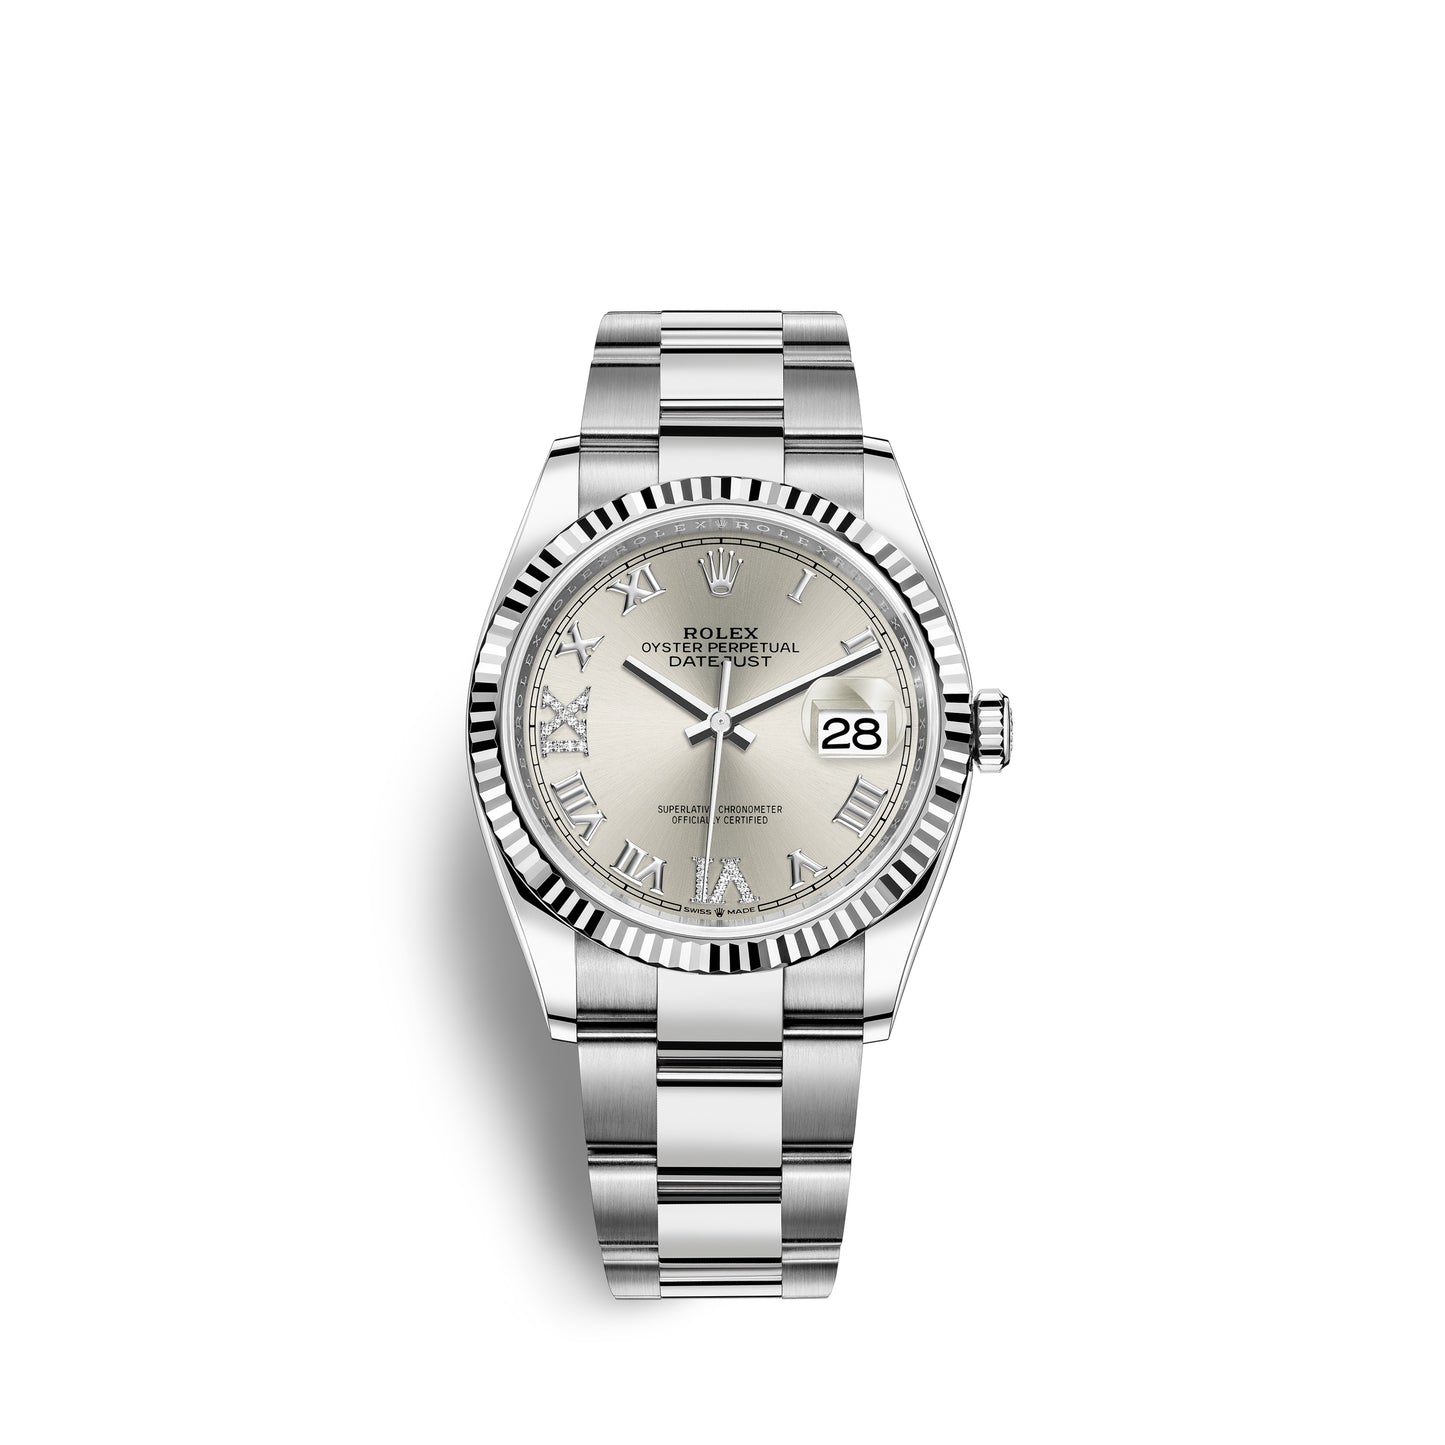 Rolex Datejust 36, Stainless Steel and 18k White Gold, 36mm, Ref# 126234-0030